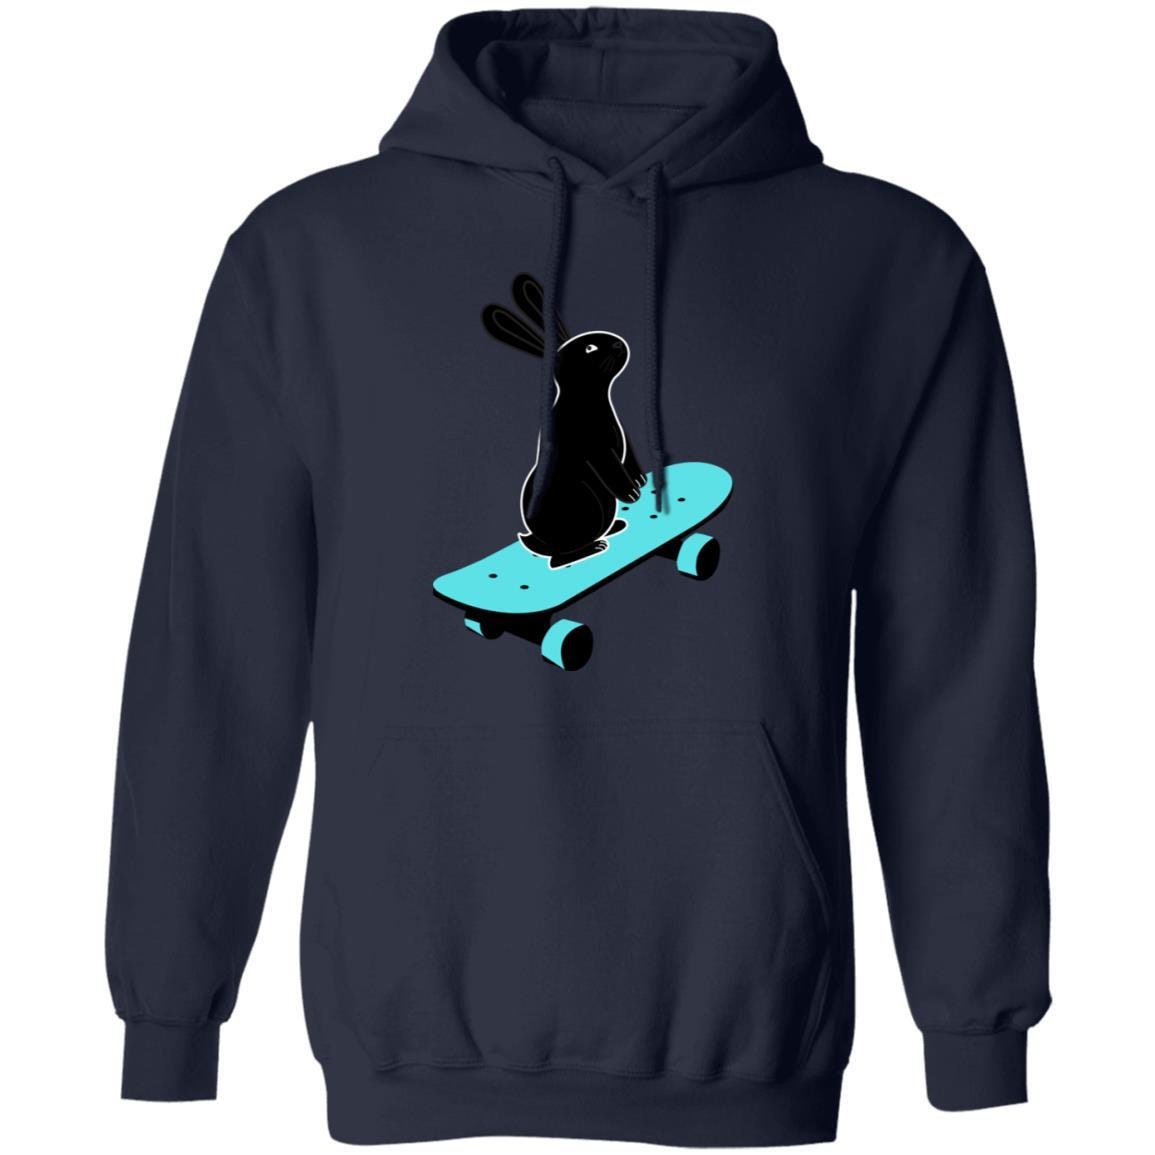 Unisex Pullover Hoodie w/ pouch pocket - Skateboard Bunny graphic print - Fun unique present for extreme sports enthusiasts & rabbit lovers